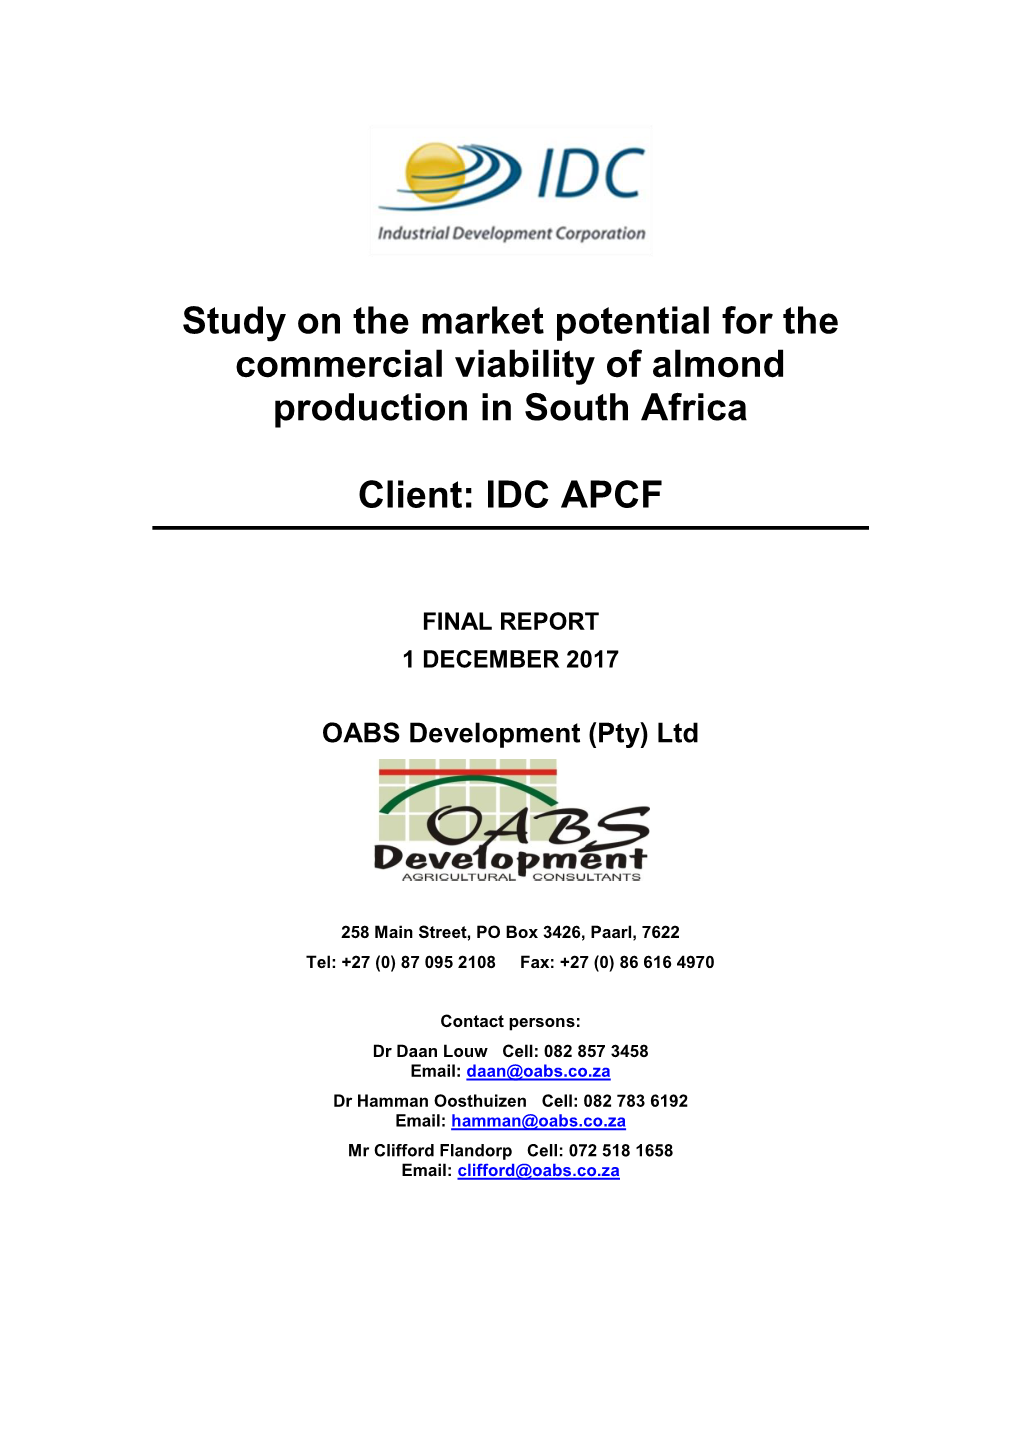 Study on the Market Potential for the Commercial Viability of Almond Production in South Africa Client